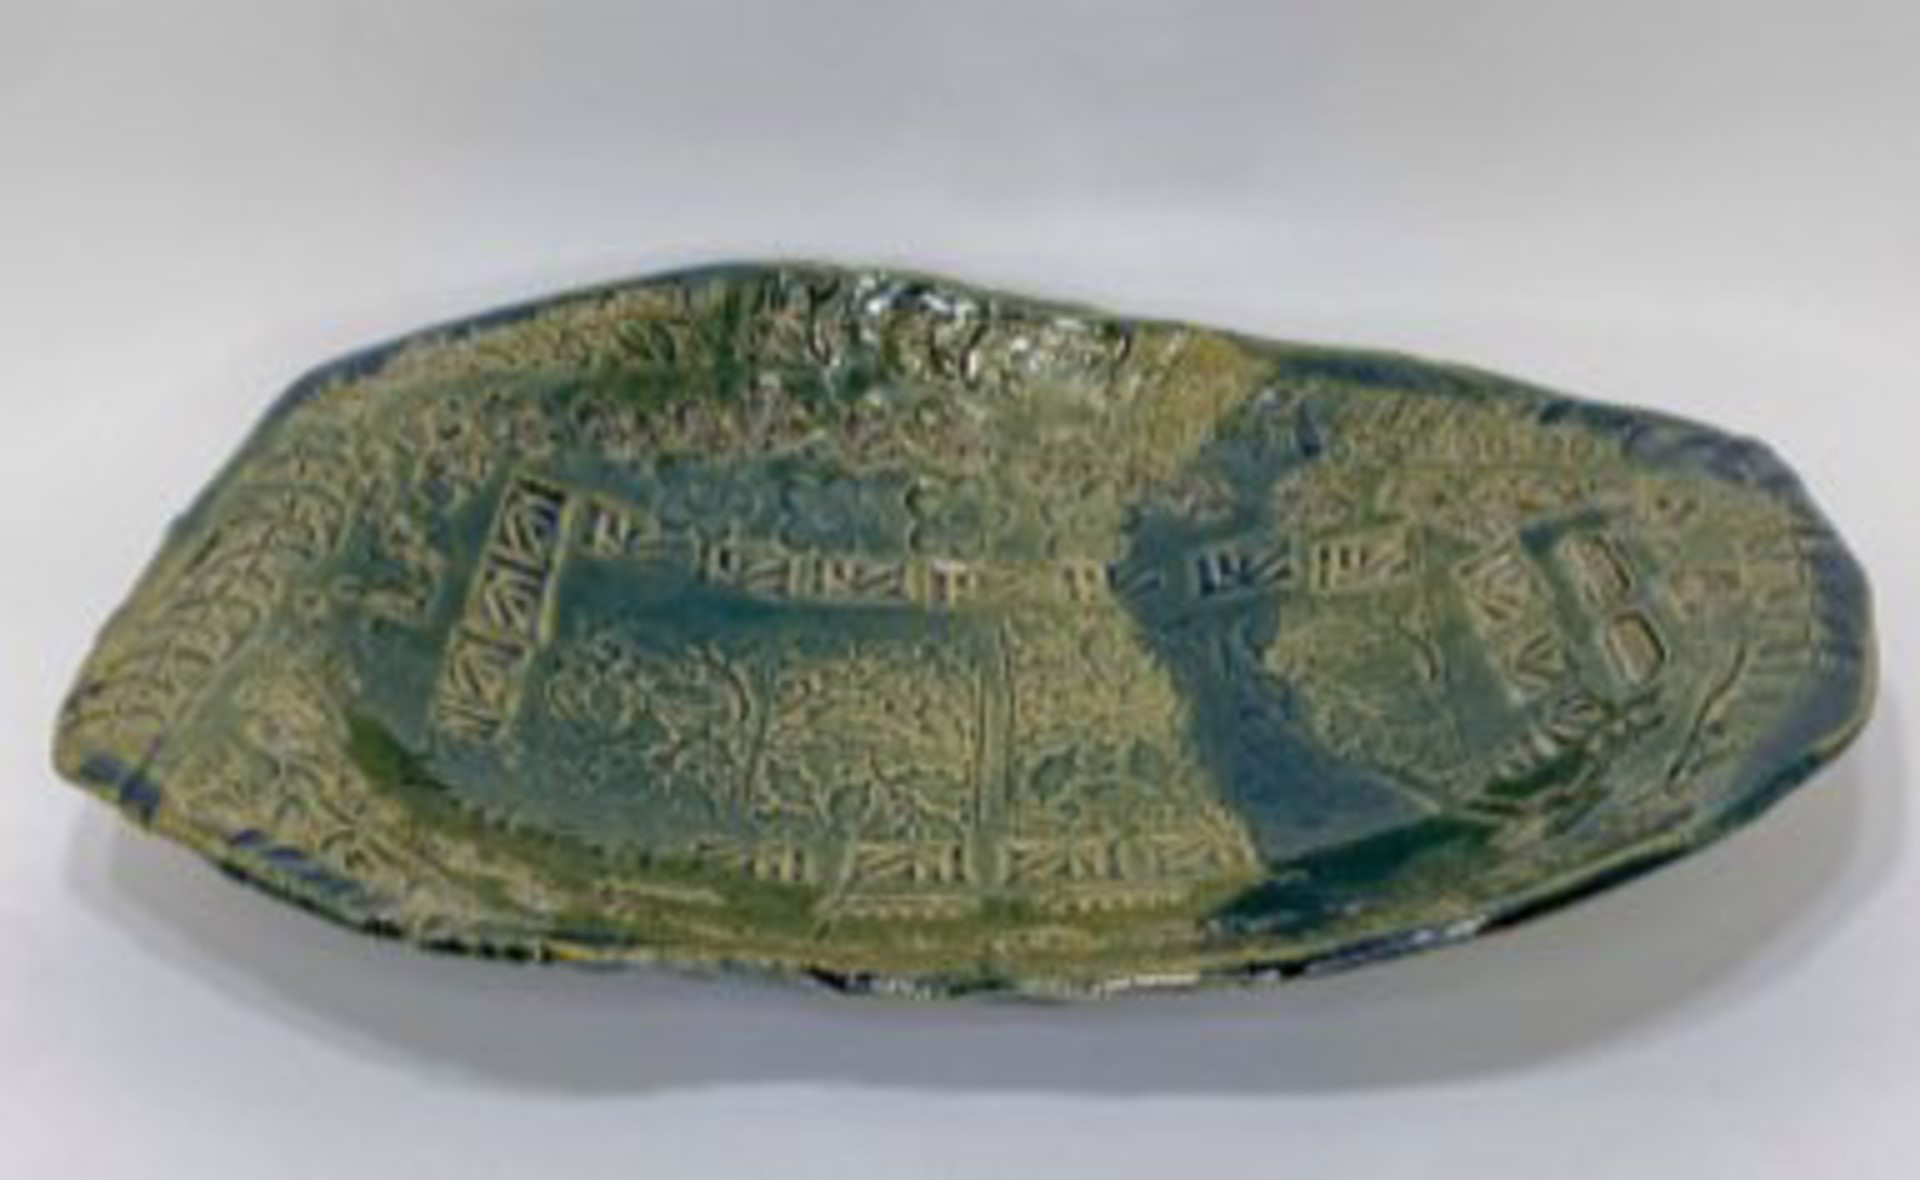 "Large Bowl with Green Floral Stamps" by Tyler by One Step Beyond